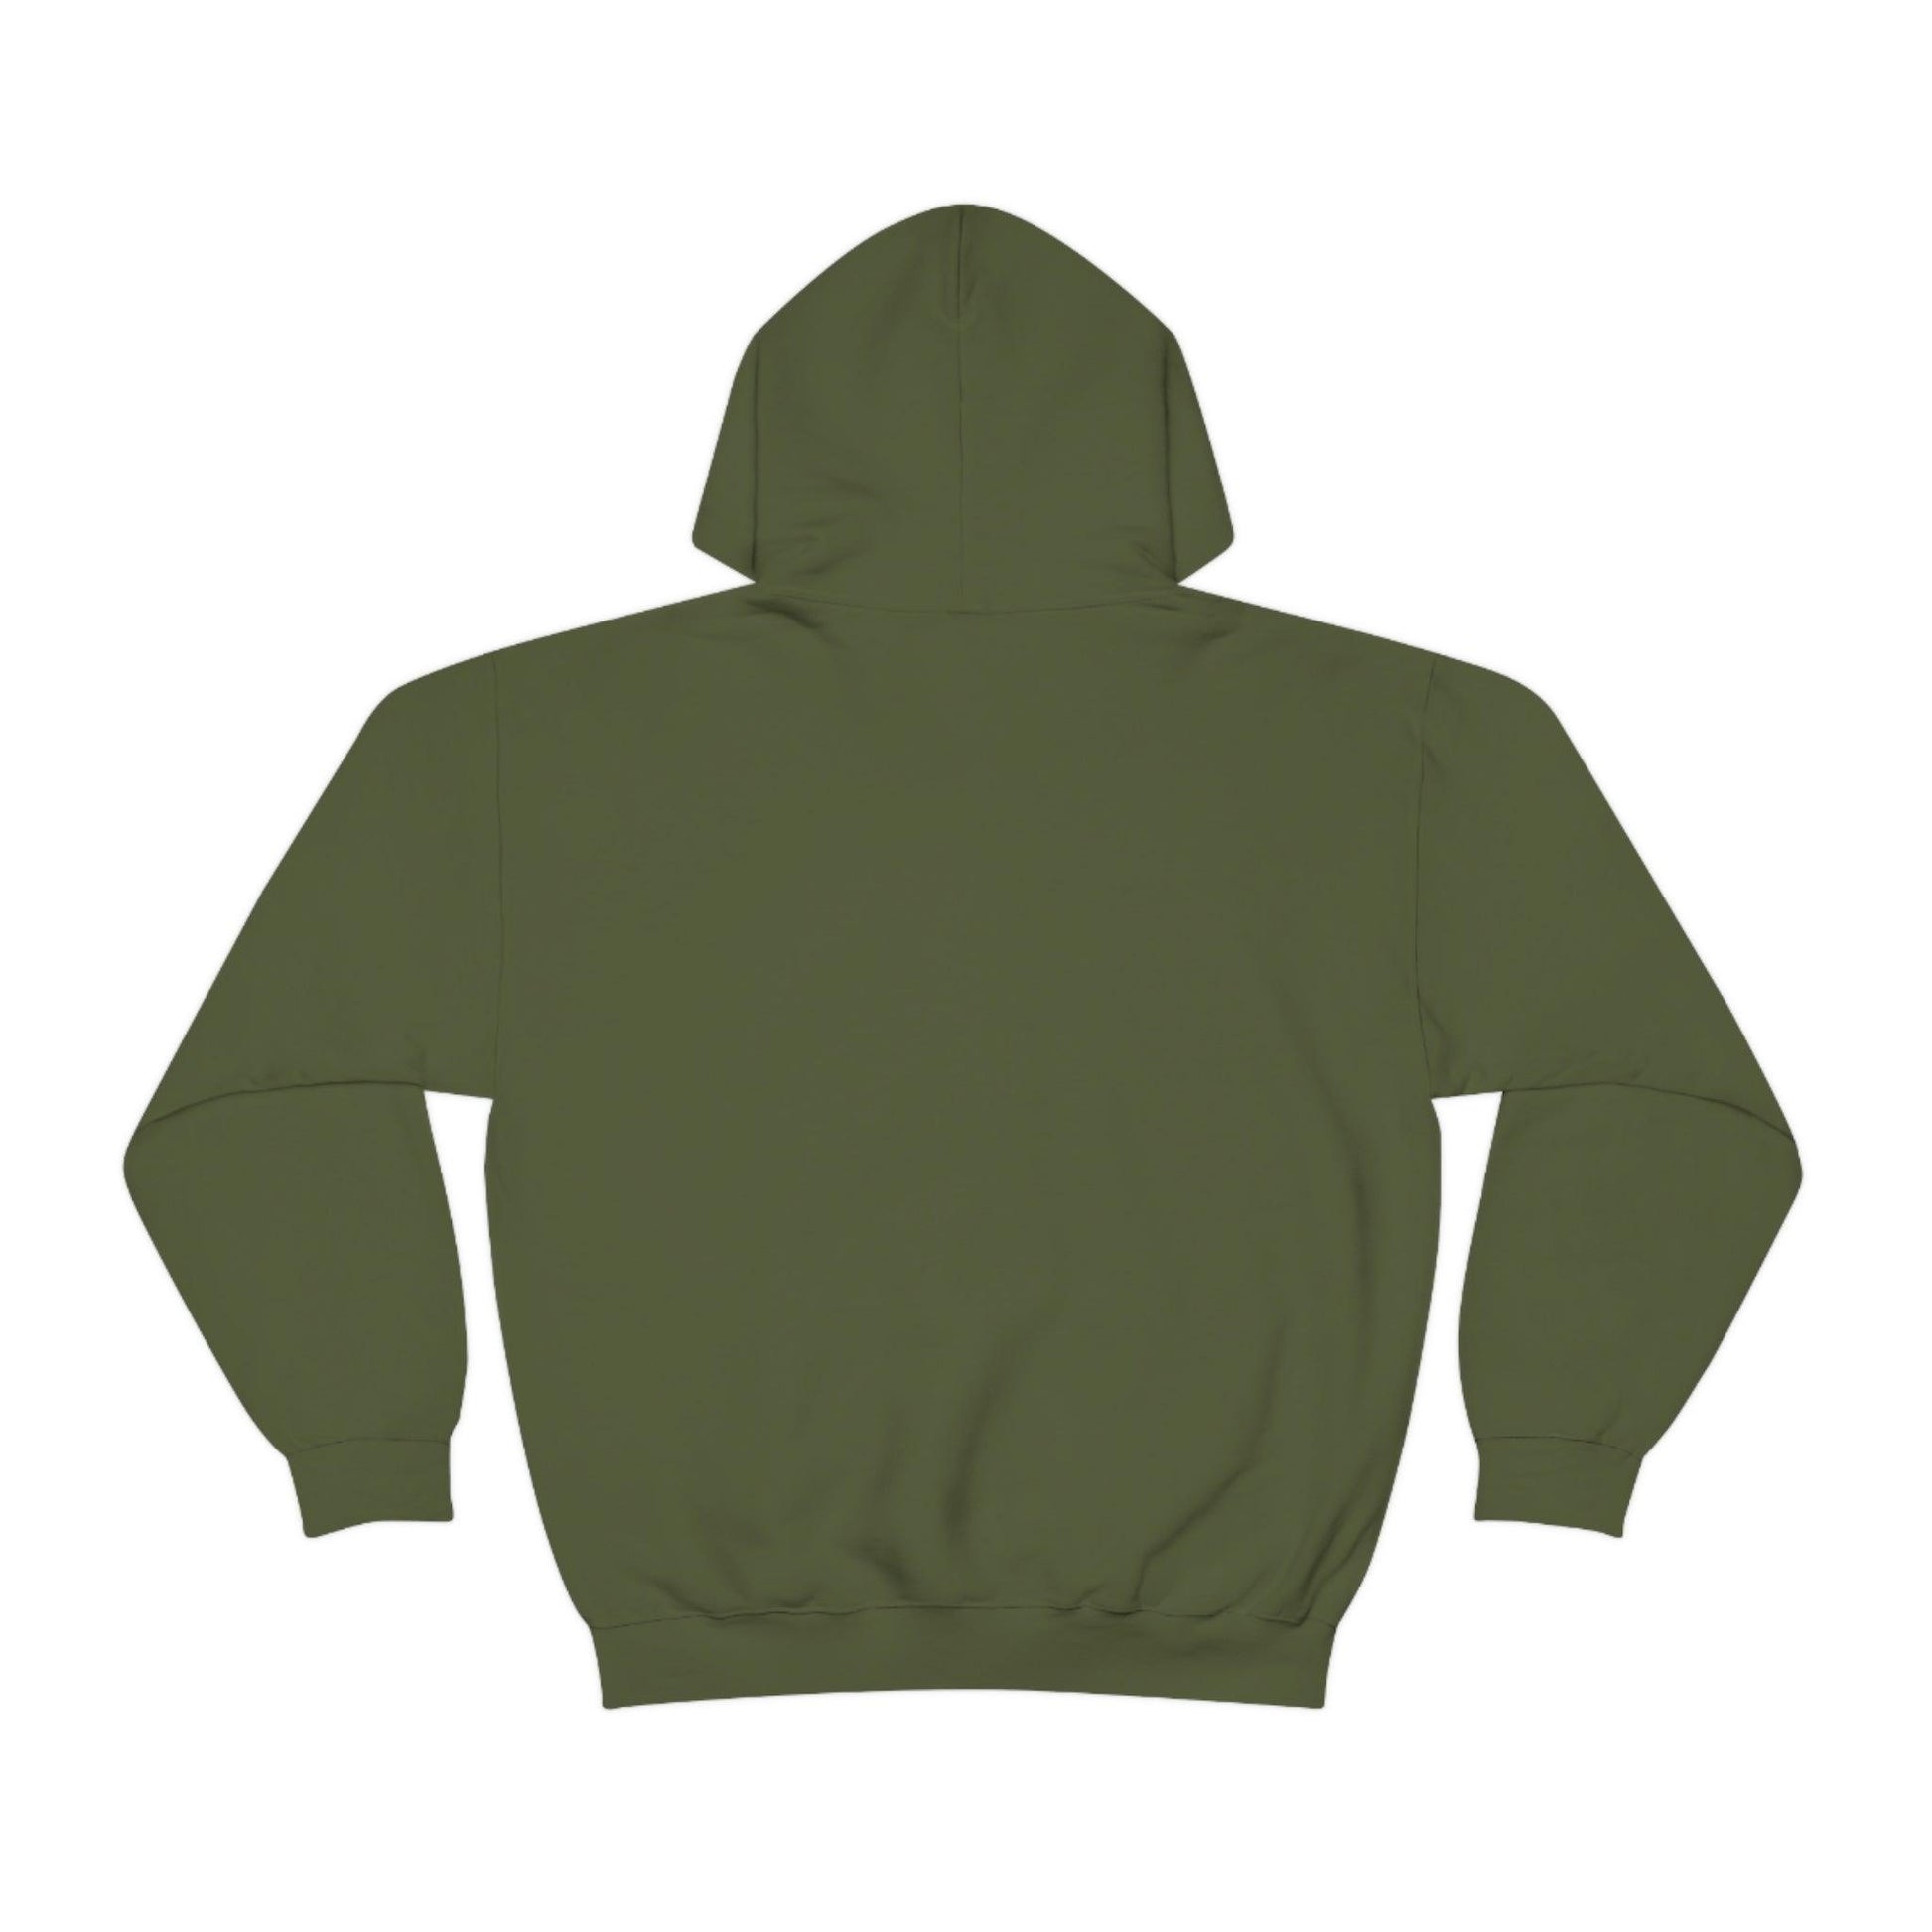 Valentine's day Hooded Sweatshirt (this is all i want for valentine) - Giftsmojo